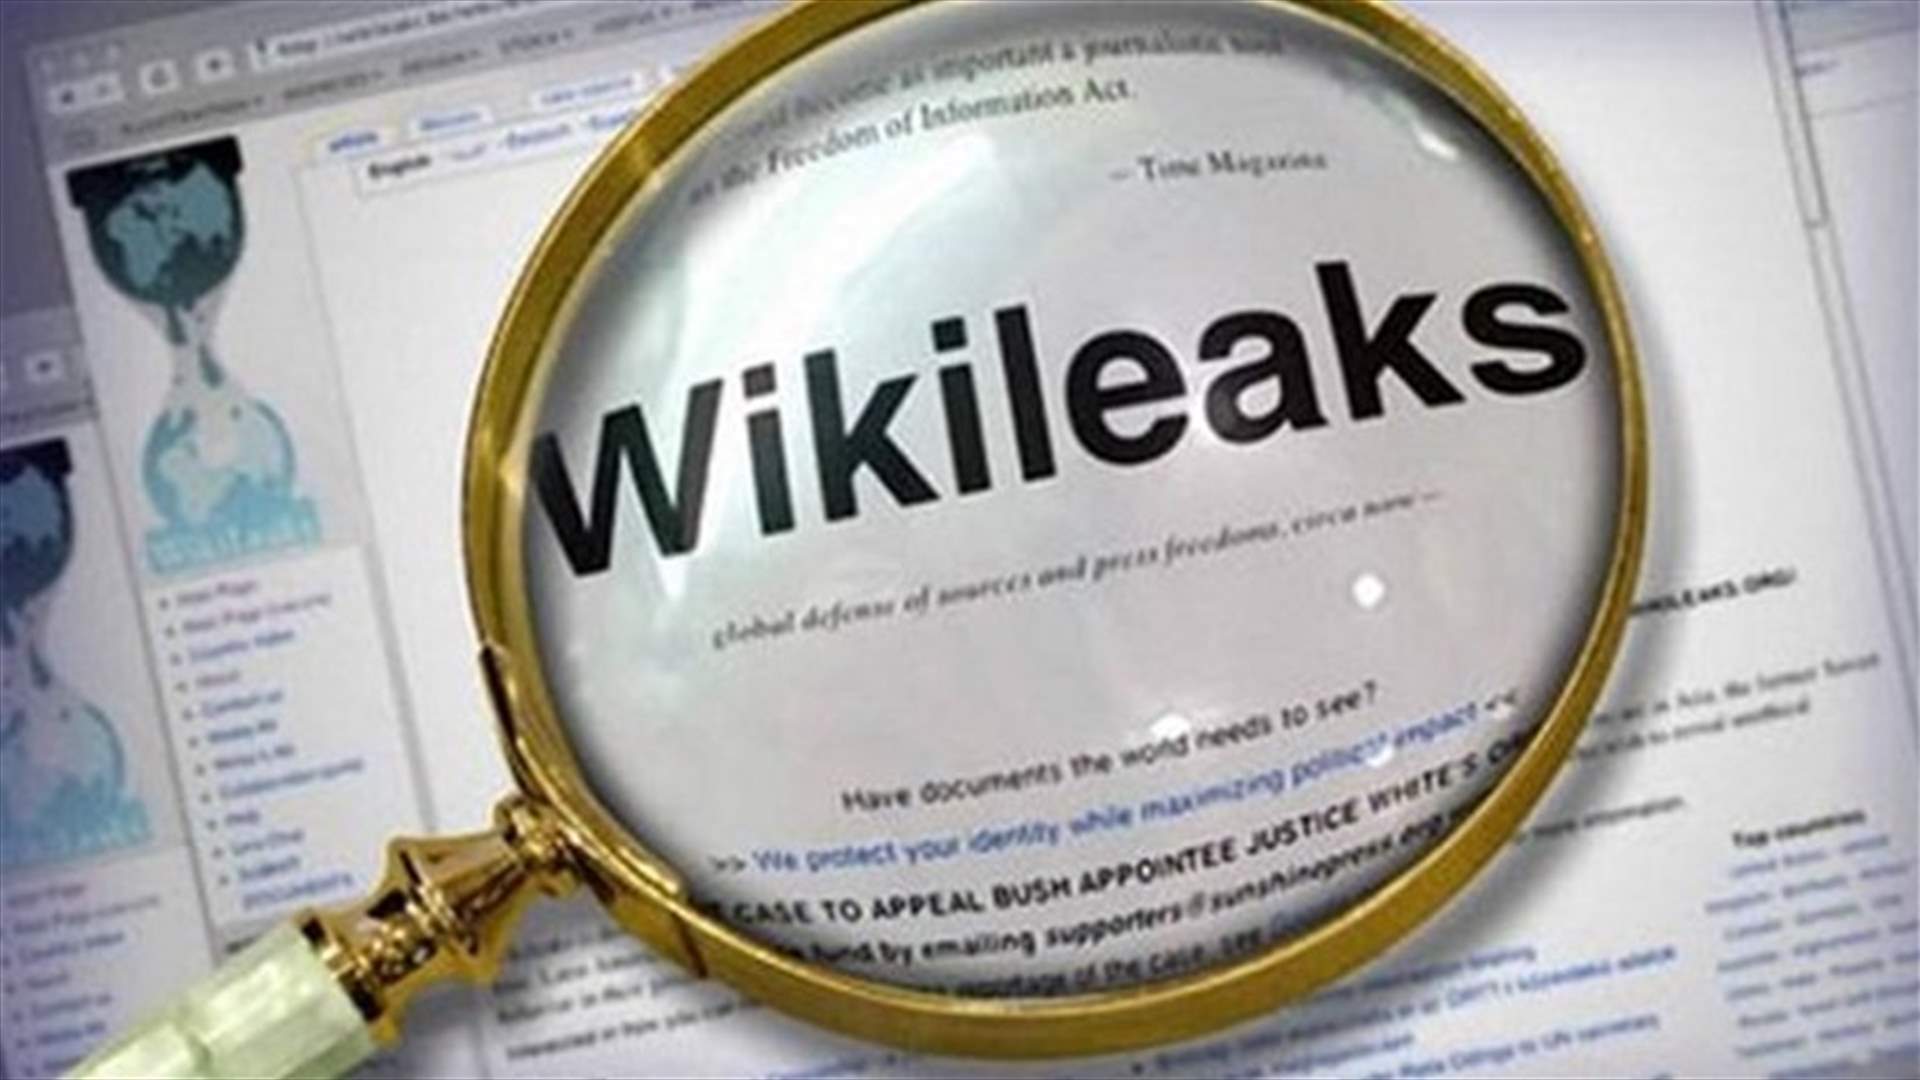 Turkey blocks access to WikiLeaks after ruling party email dump